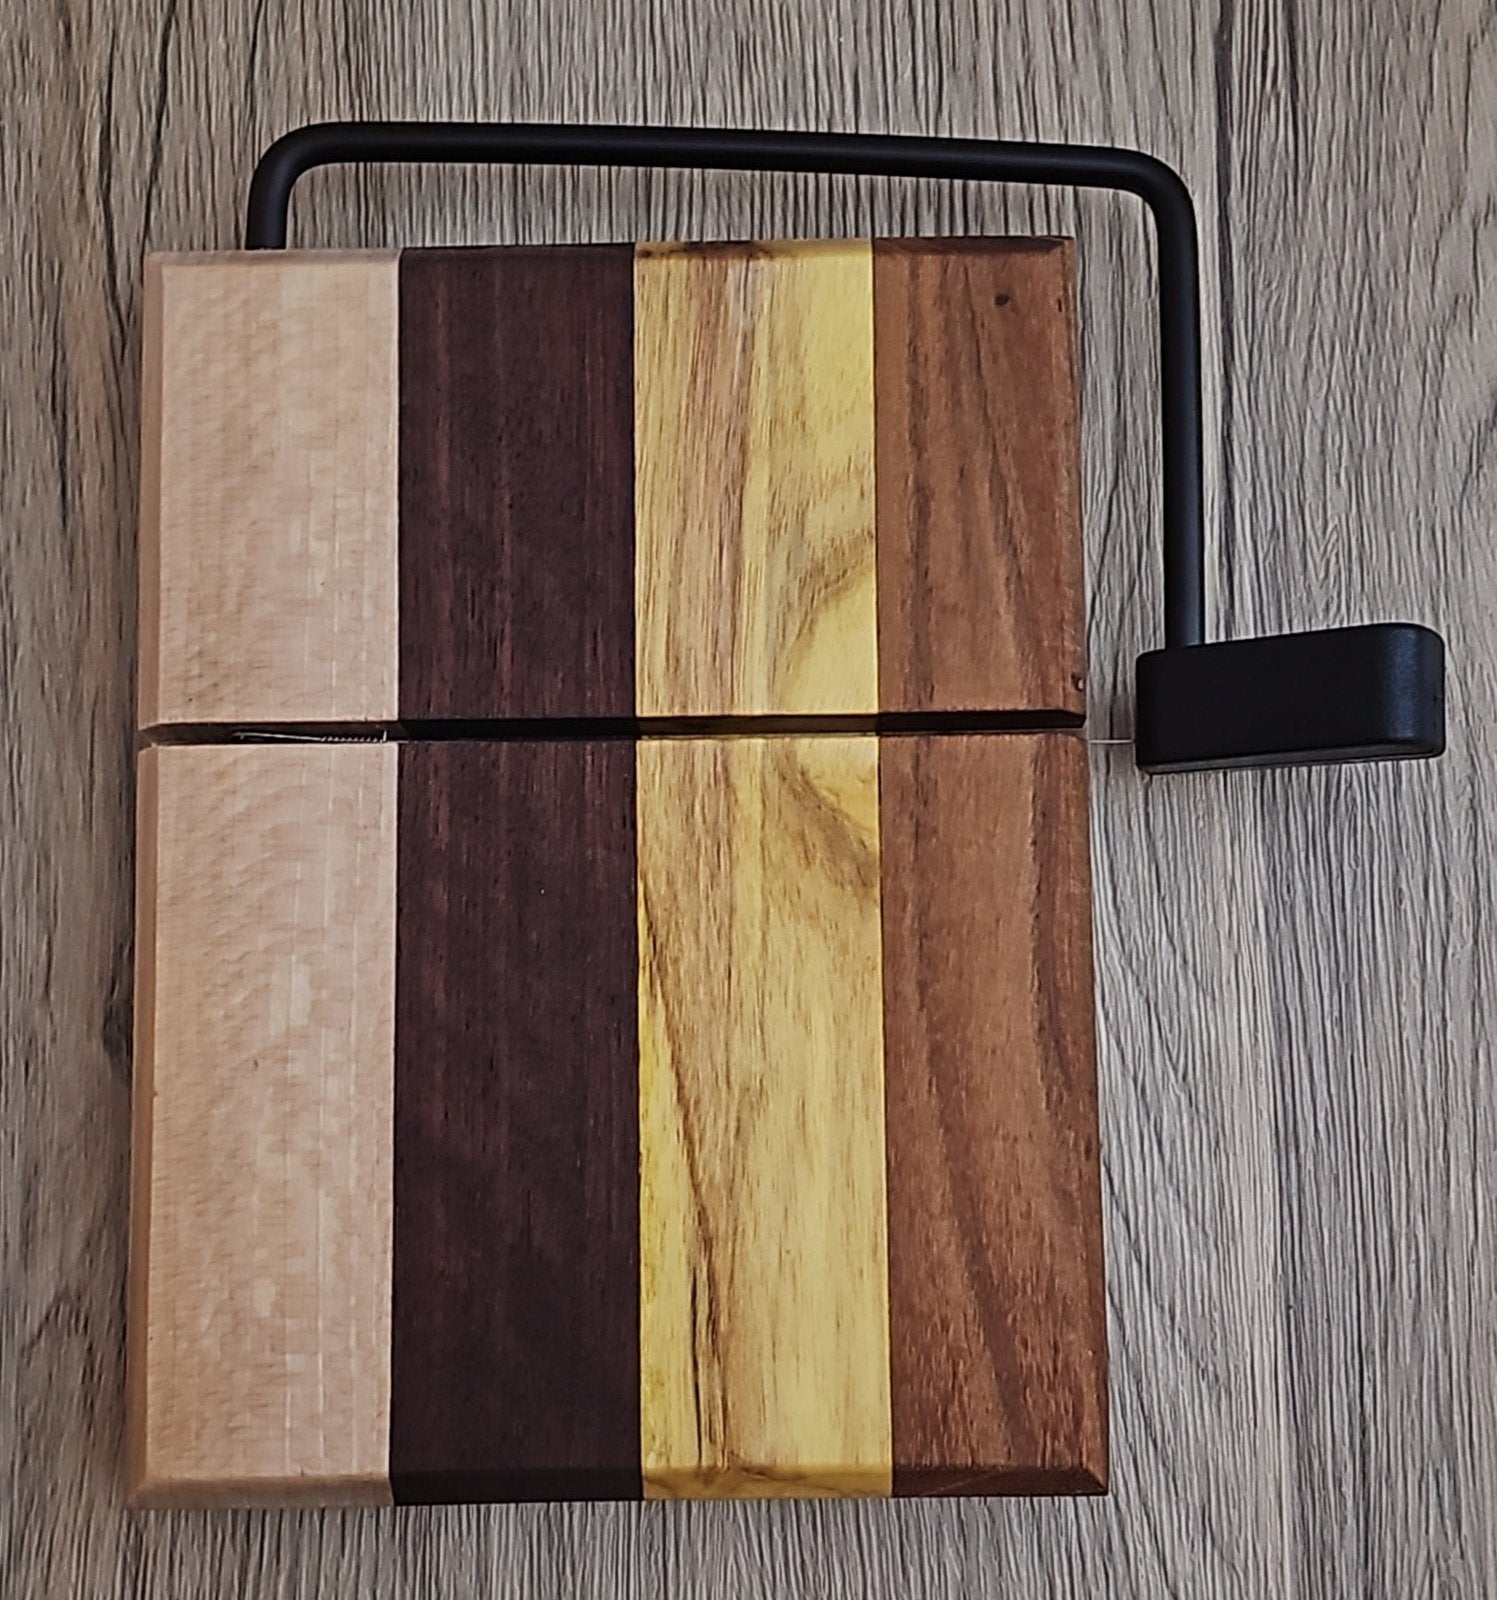 Mulberry, Walnut, Sycamore, and Sapele Cheese Slicer Board